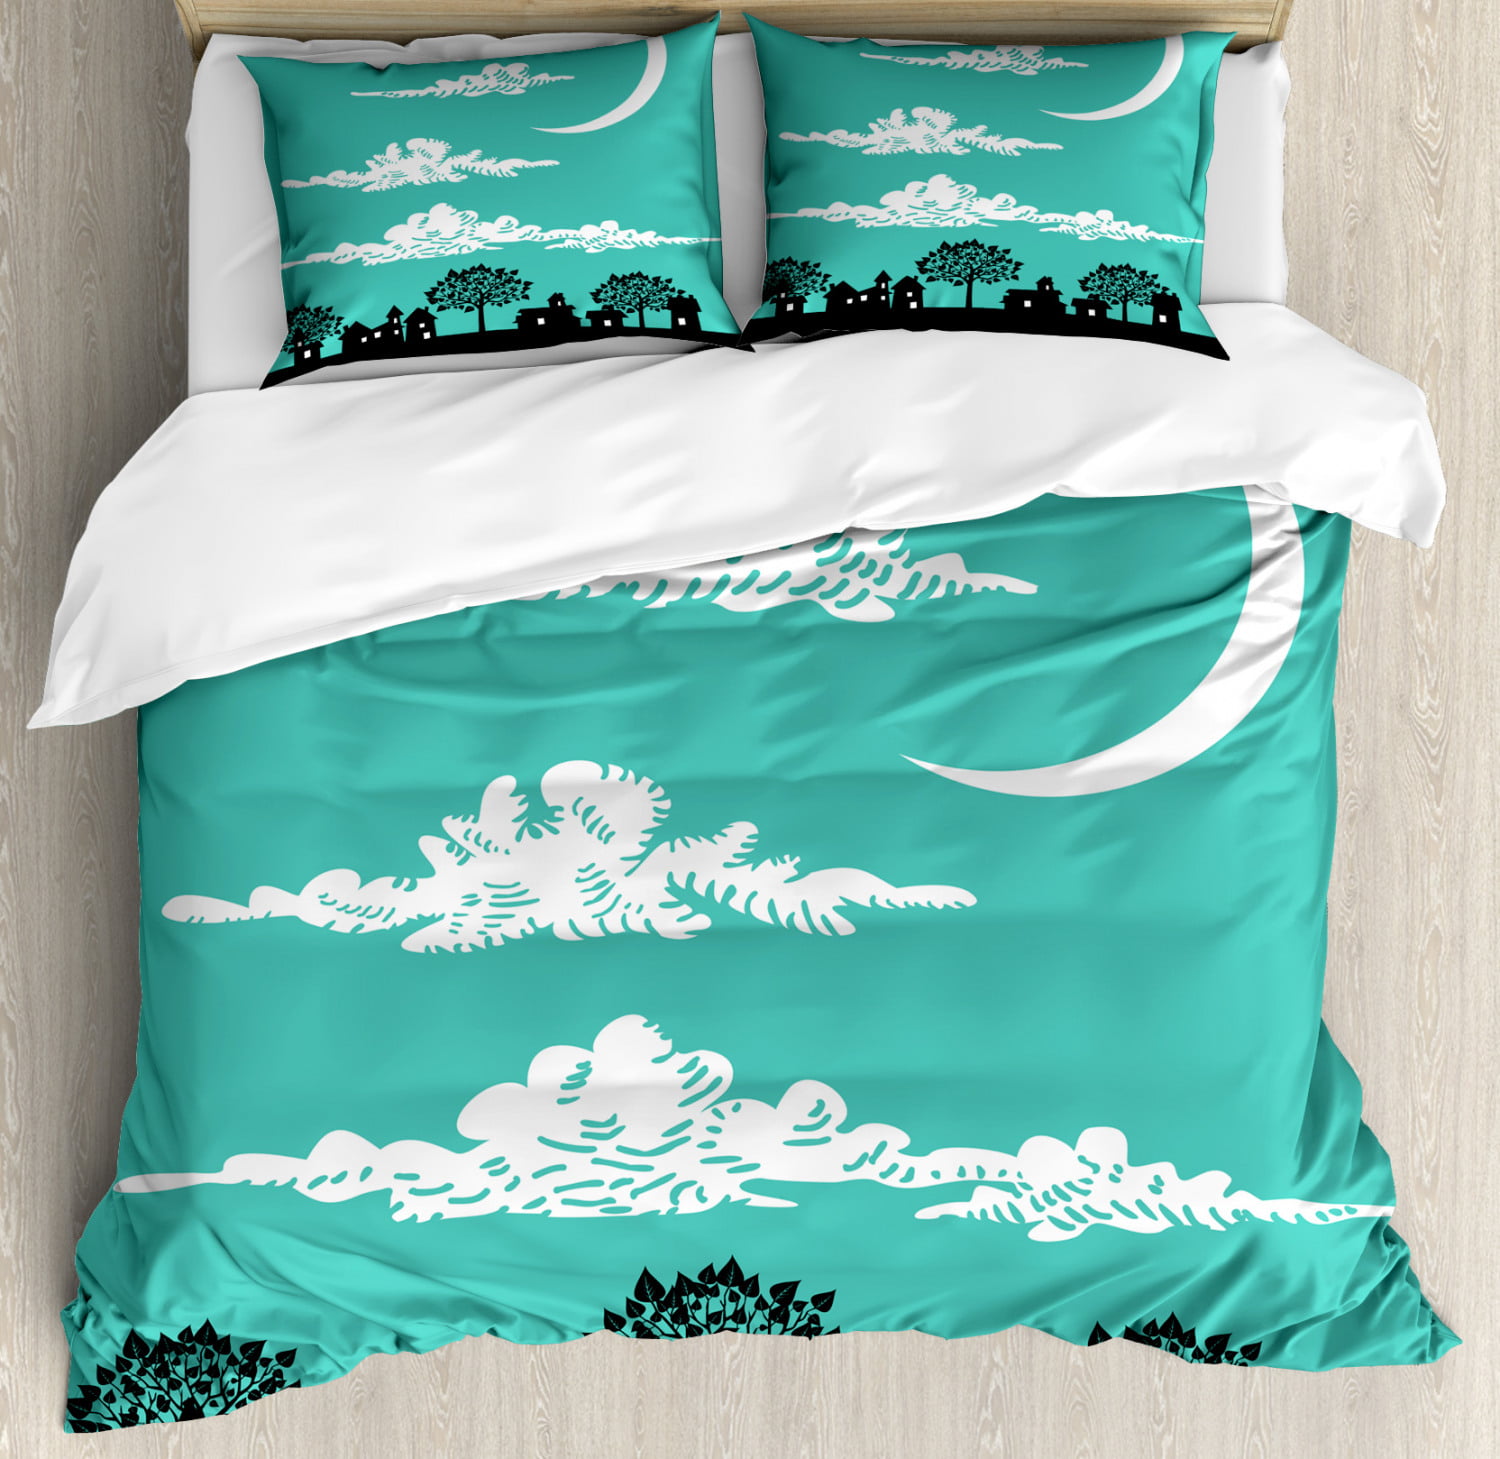 Cloud King Size Duvet Cover Set Silhouette Buildings And Trees